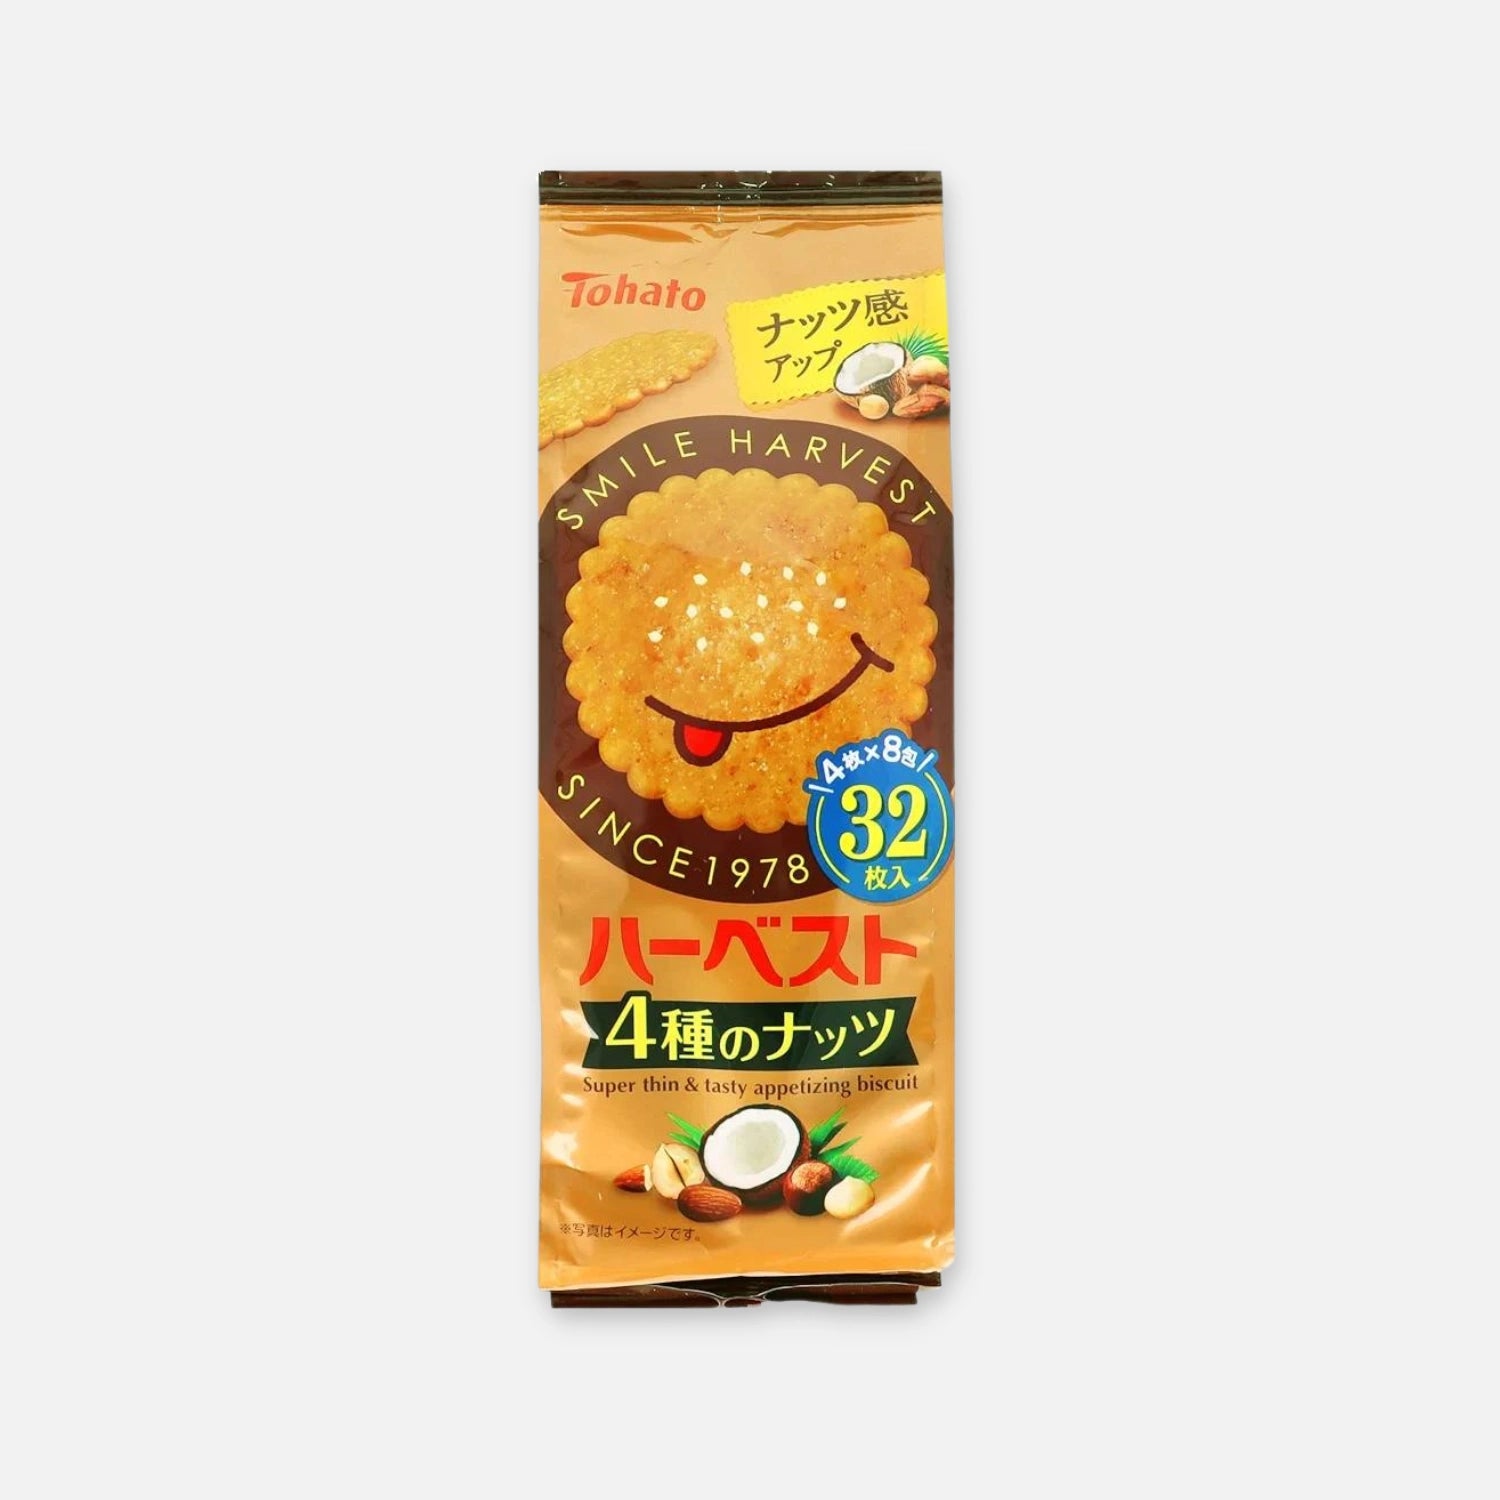 Tohato Harvest 4 Types of Nuts Biscuit 96g (32 Units) - Buy Me Japan